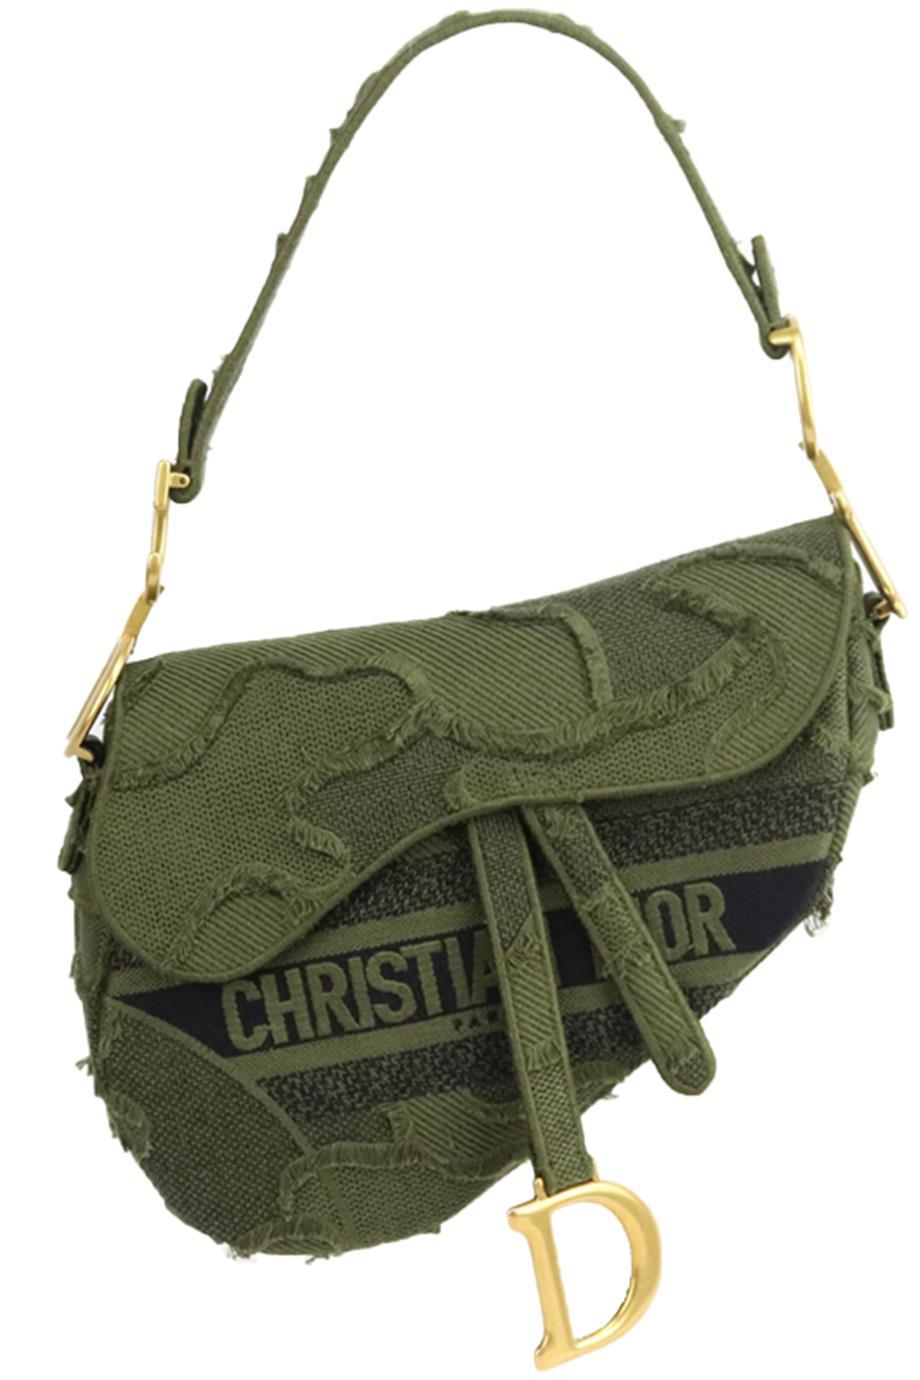 Made in Italy, this beautiful Christian Dior 2019 'Saddle' handbag has been made from green and black canvas exterior with matching interior, this piece is decorated with Dior's antiqued gold-tone hardware on the front and sides and logo across the